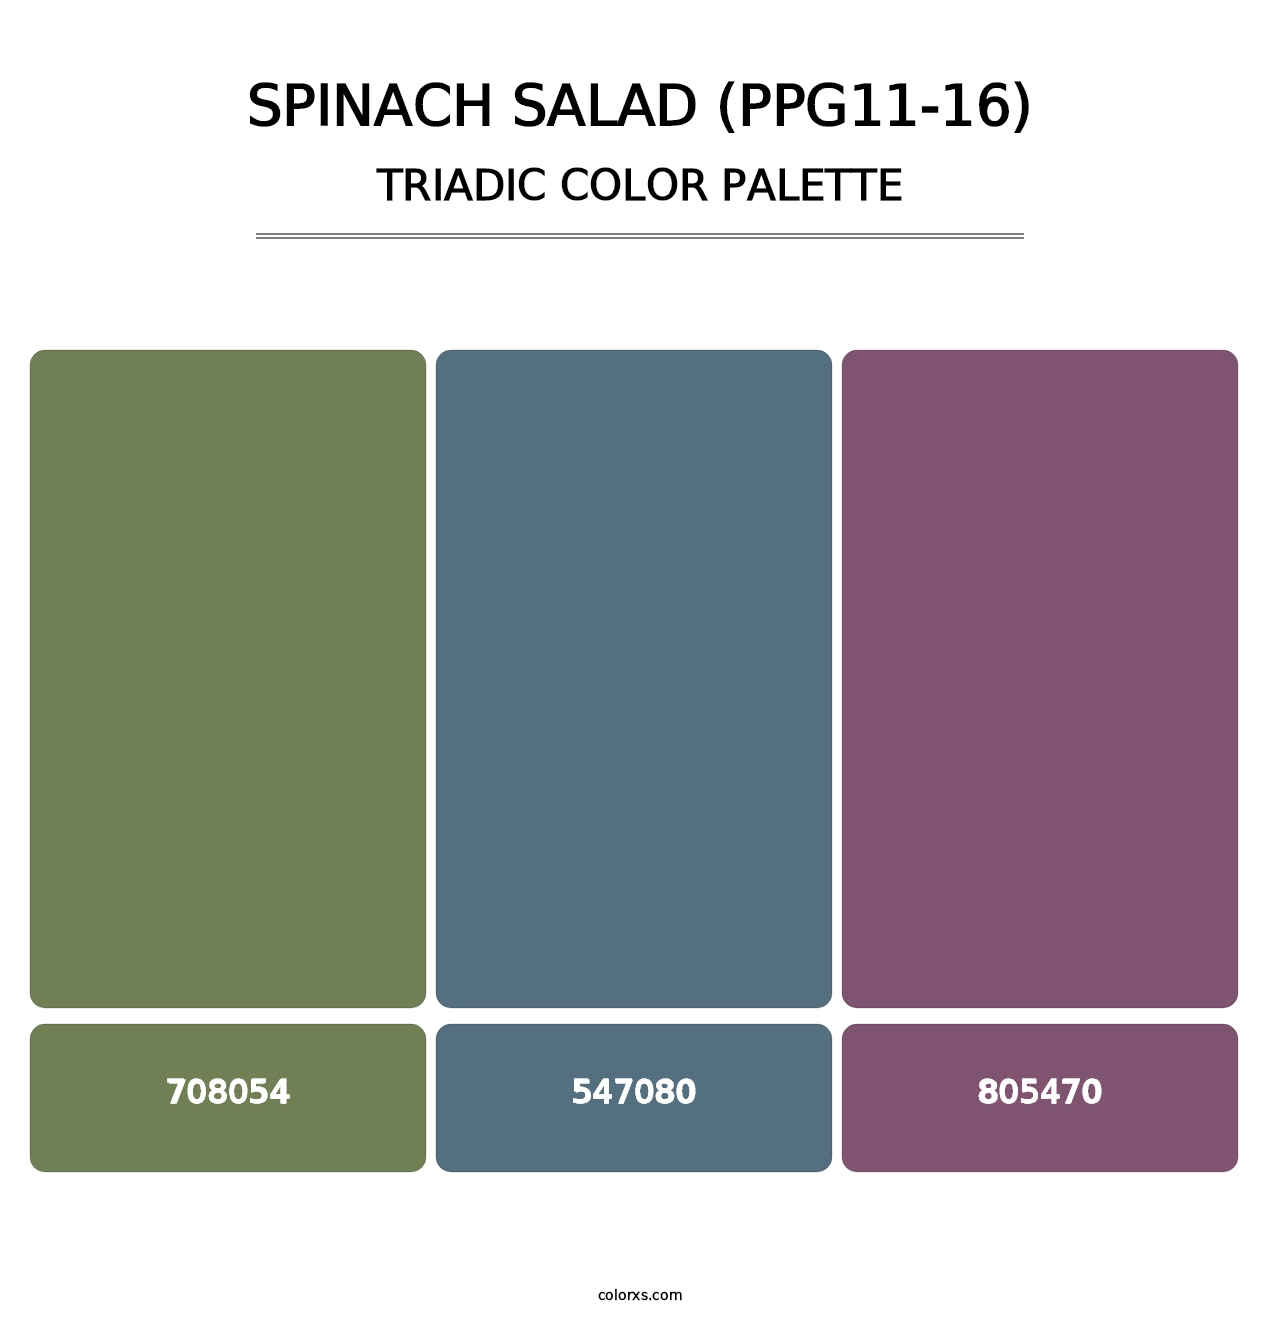 Spinach Salad (PPG11-16) - Triadic Color Palette